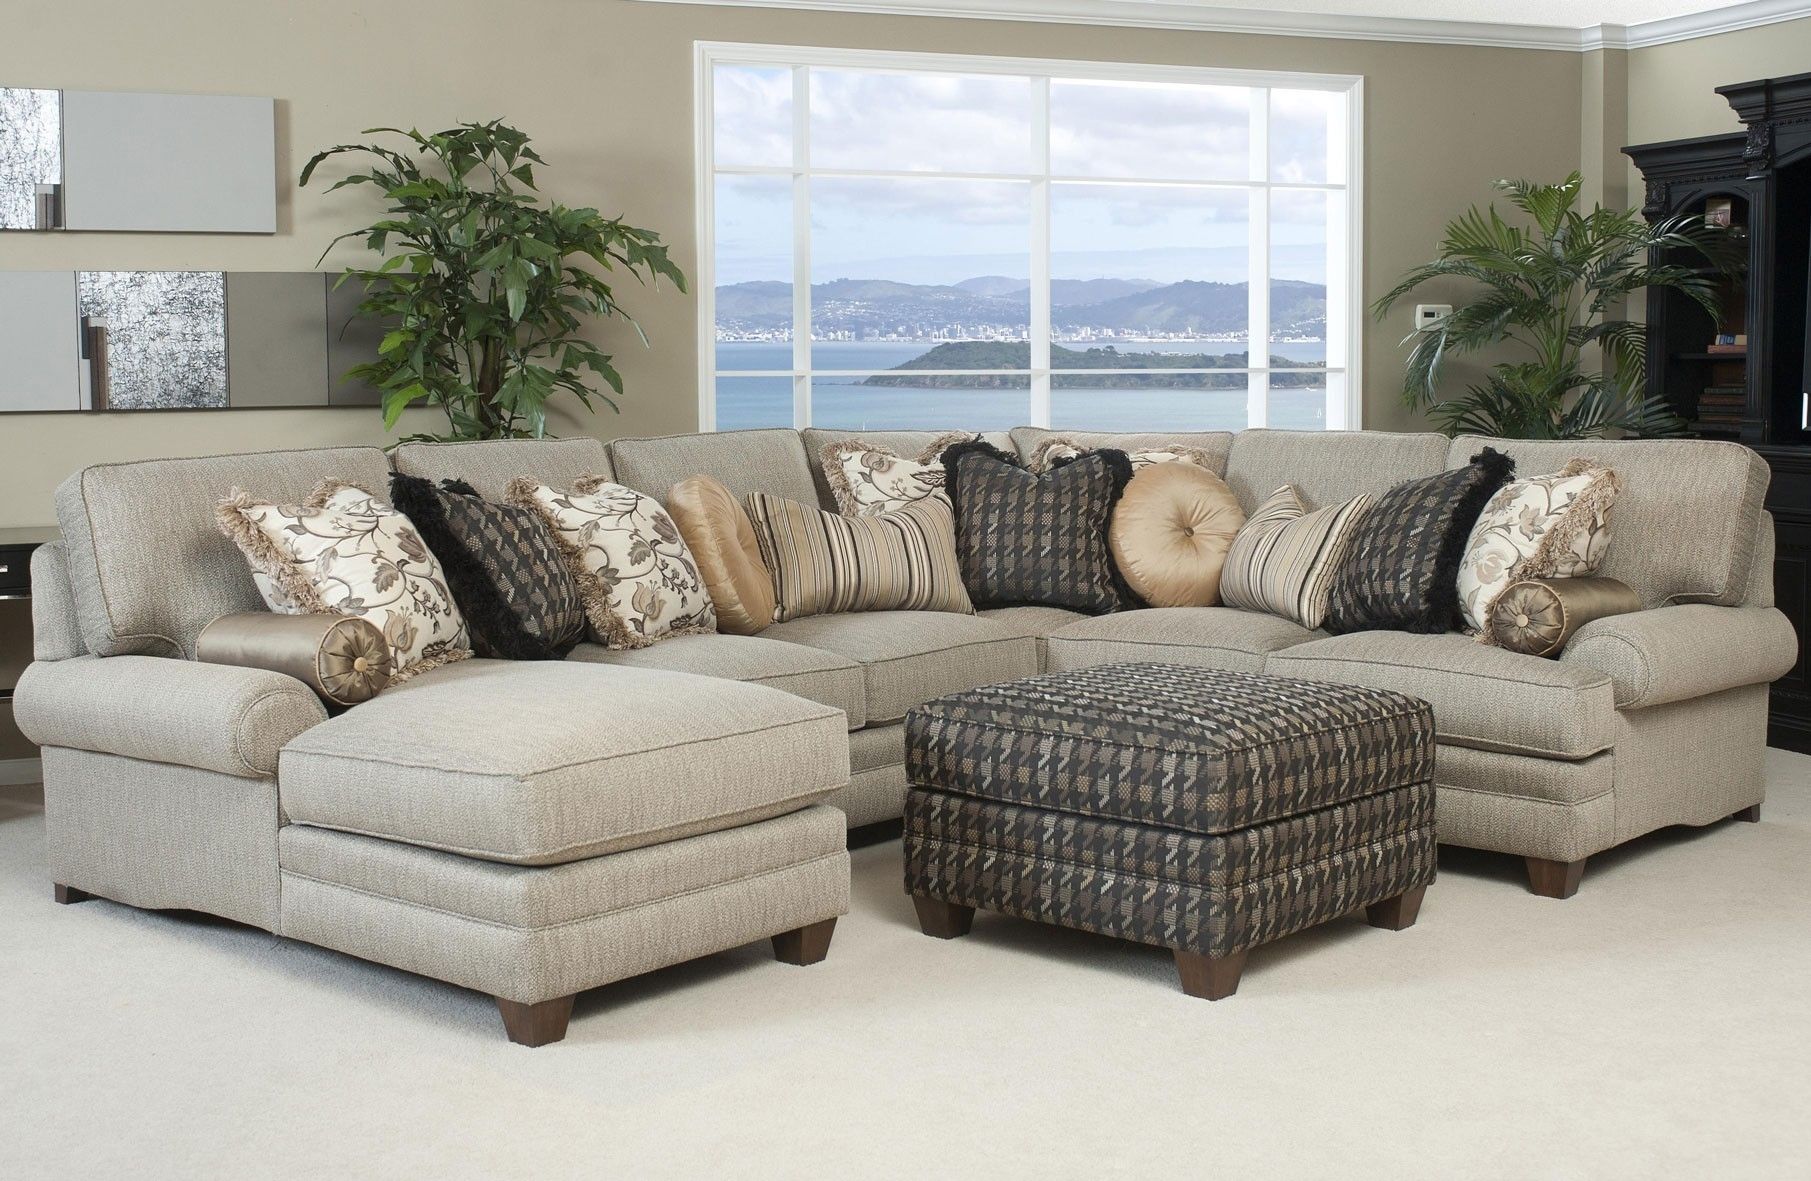 Cheap Sectional Sofas In Roanoke Va | Home Decoration Ideas Within Roanoke Va Sectional Sofas (View 4 of 10)